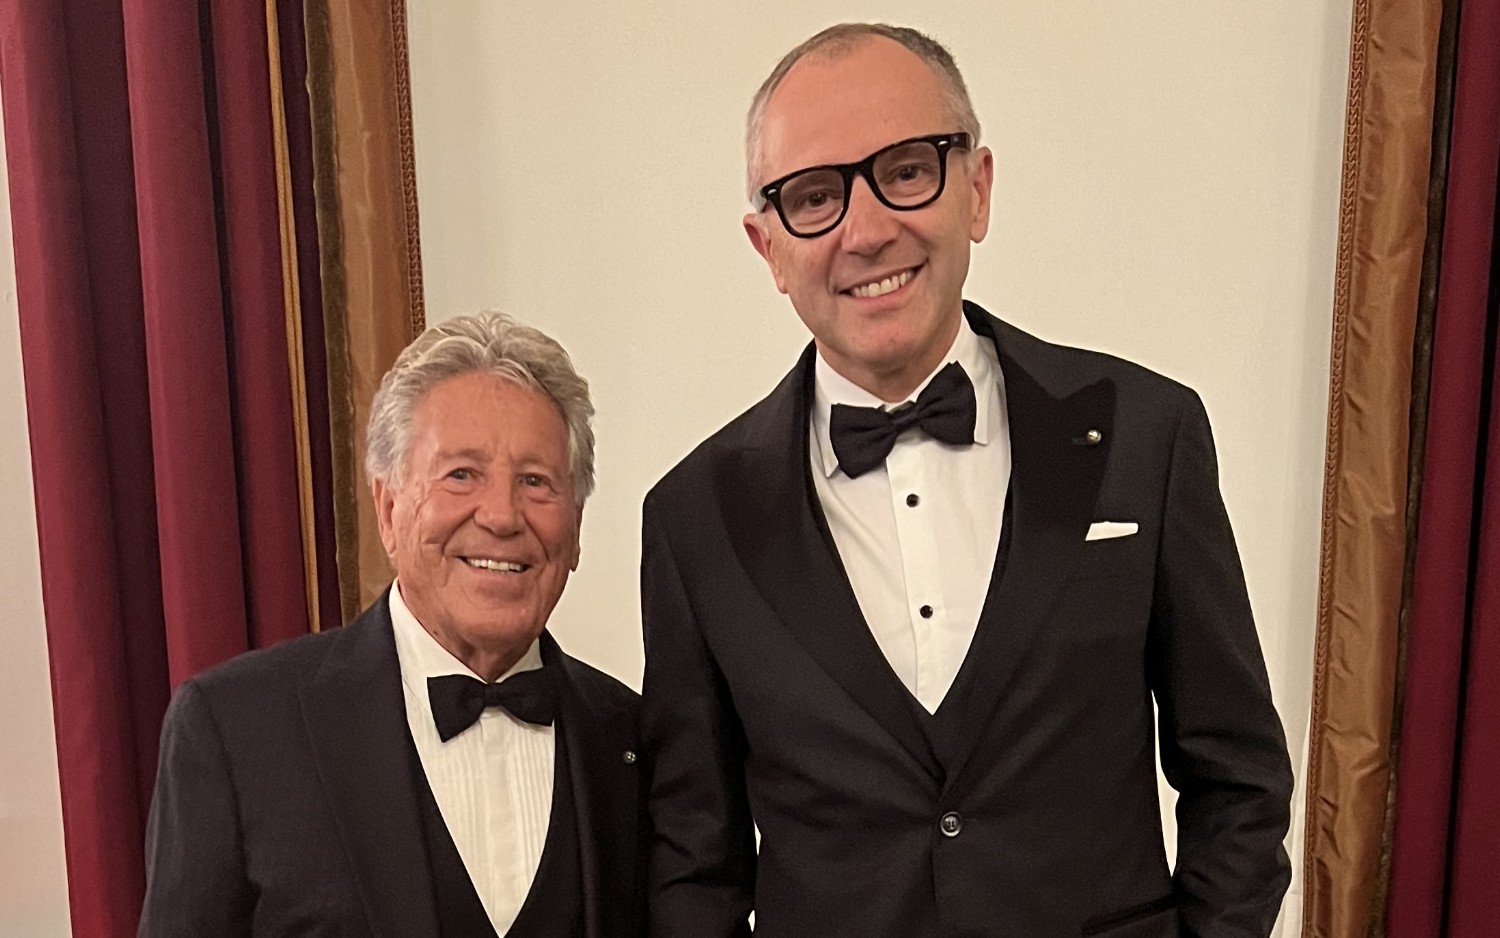 Mario Andretti and Stefano Domenicali at the 2023 National Italian American Foundation gala in Washington DC. Celebrating the best of Italian heritage with leaders in business, politics & the arts